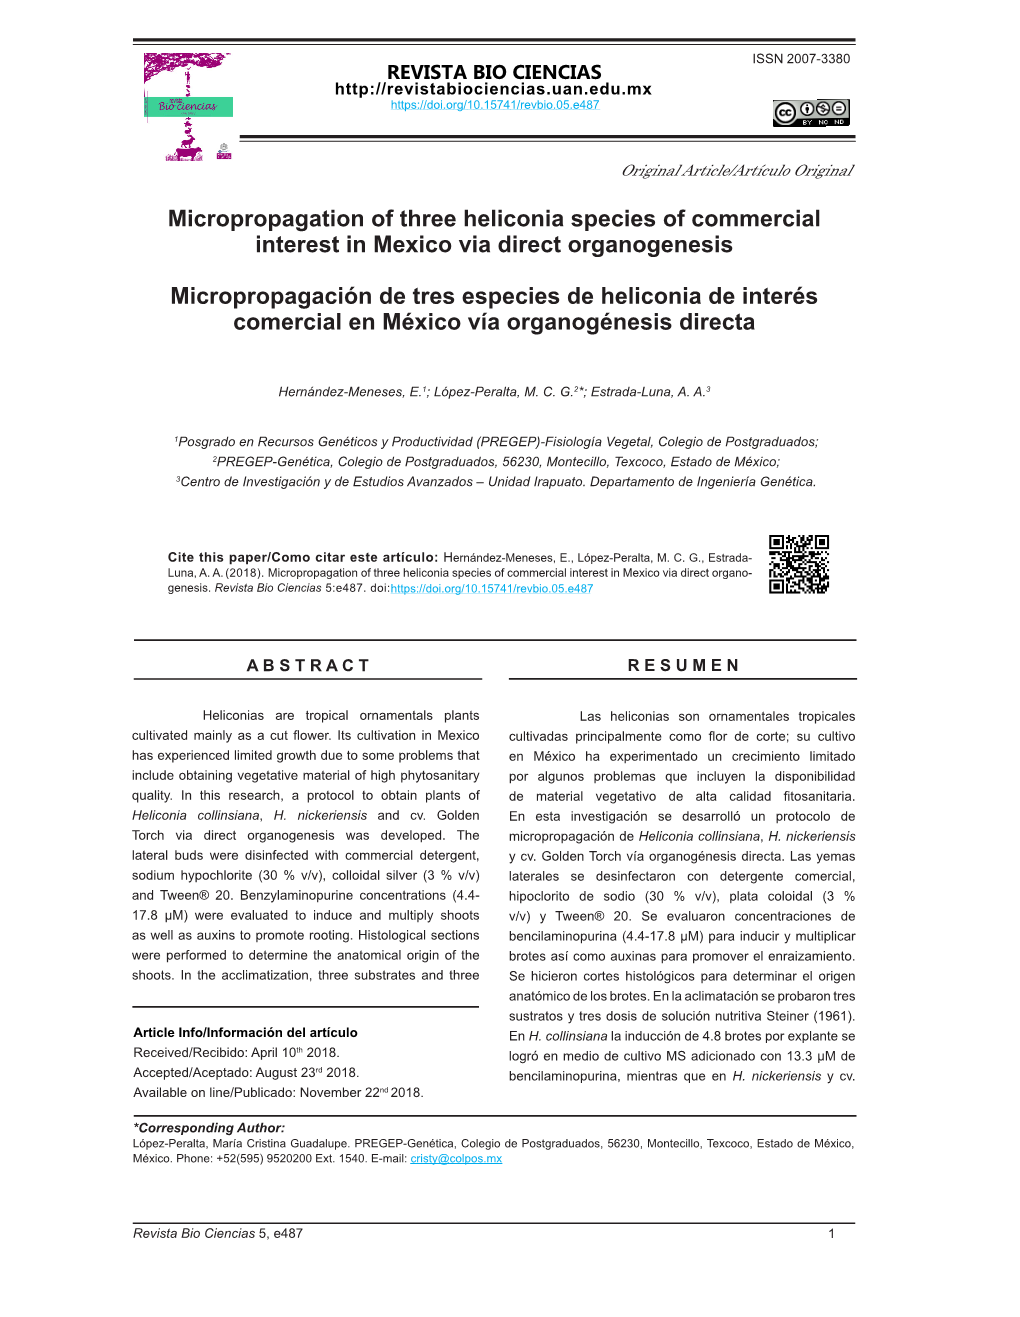 Micropropagation of Three Heliconia Species of Commercial Interest in Mexico Via Direct Organogenesis